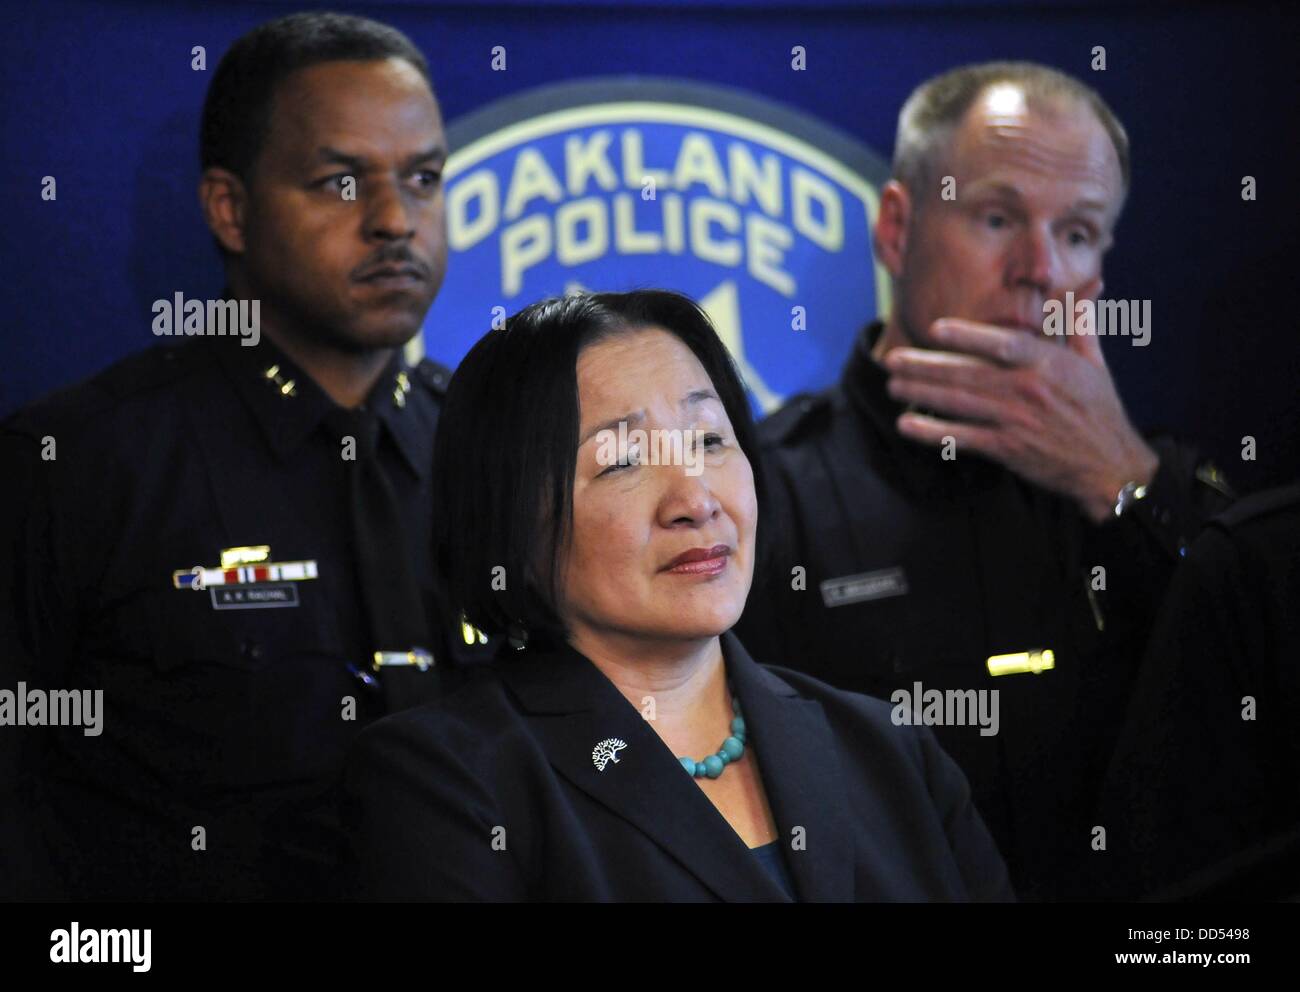 May 8, 2013 - Oakland, California, USA - Oakland Mayor Jean Quan speaks at a press conference at the Oakland Police Department headquarters building in Oakland, California on Wednesday May 08, 2013. Today, Oakland's Police Chief Howard Jordan announced he has stepped down, citing medical reasons. Zuma Press/Josh Edelson (Credit Image: © Josh Edelson/ZUMAPRESS.com) Stock Photo